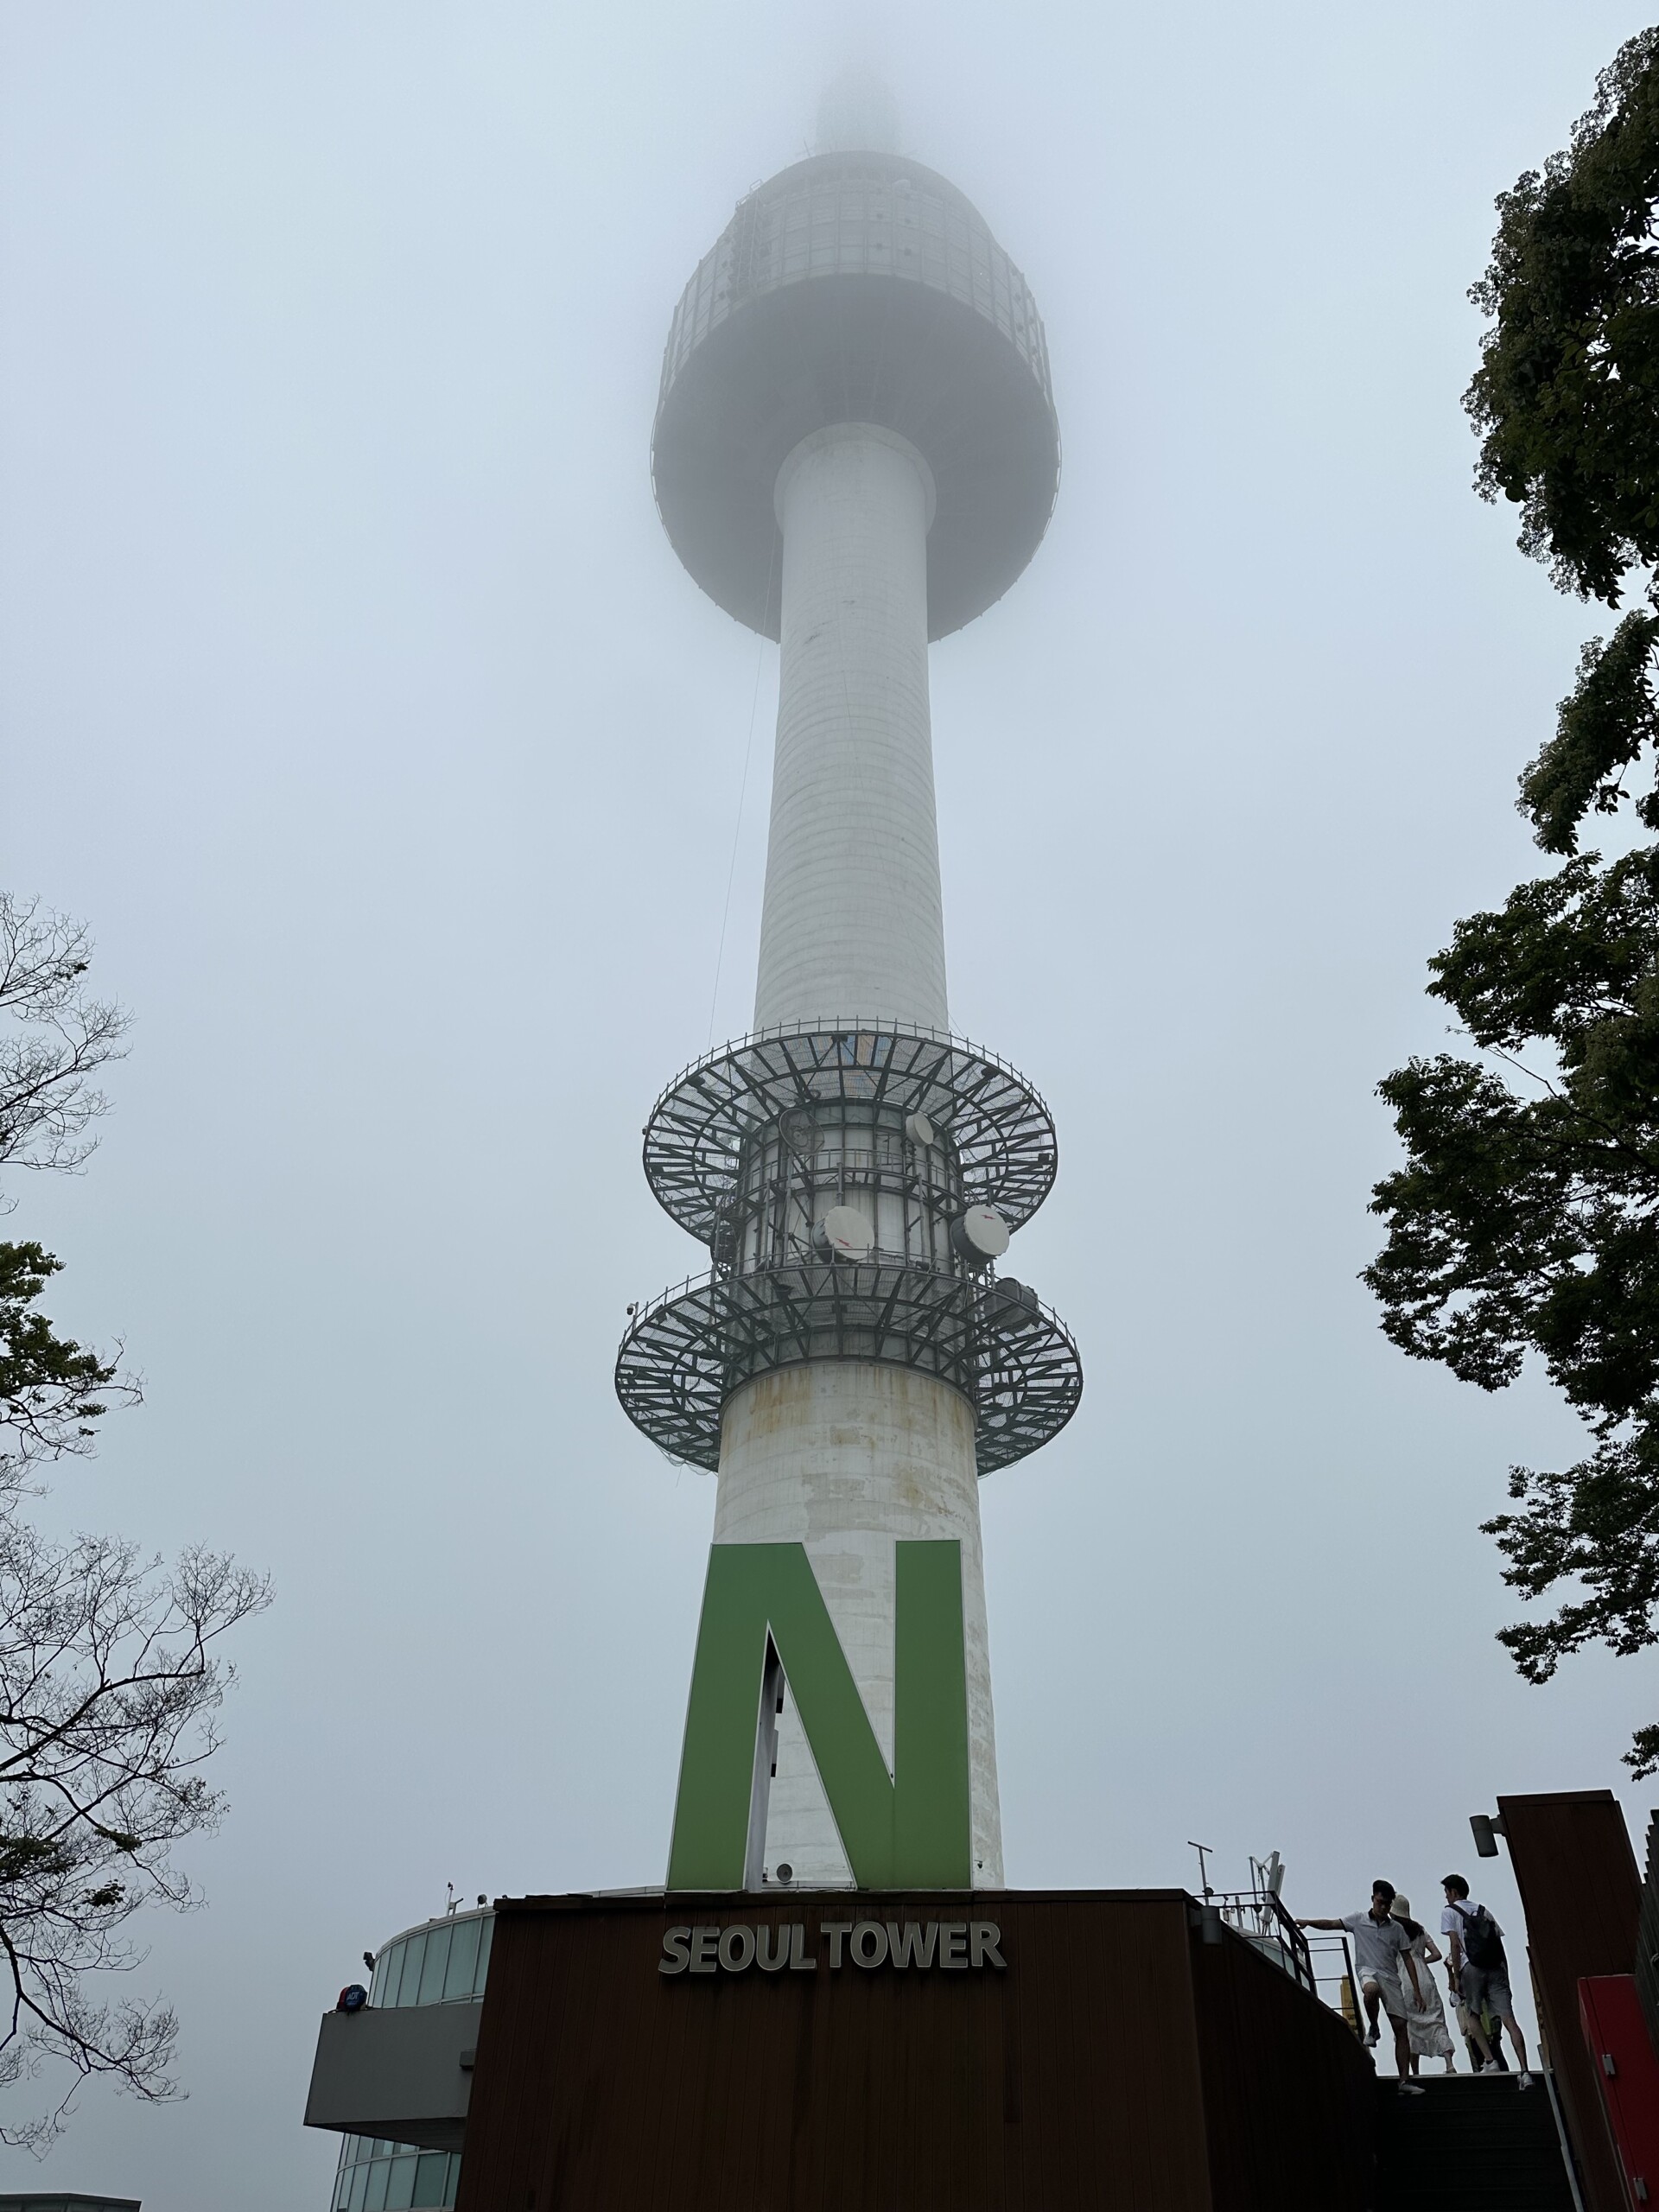 Rob Folliard and the author hiked many stairs – 126 floors worth according to our fitness trackers – to count to the top of the Namsan trail and were rewarded with an up close view of the North Seoul Tower. 